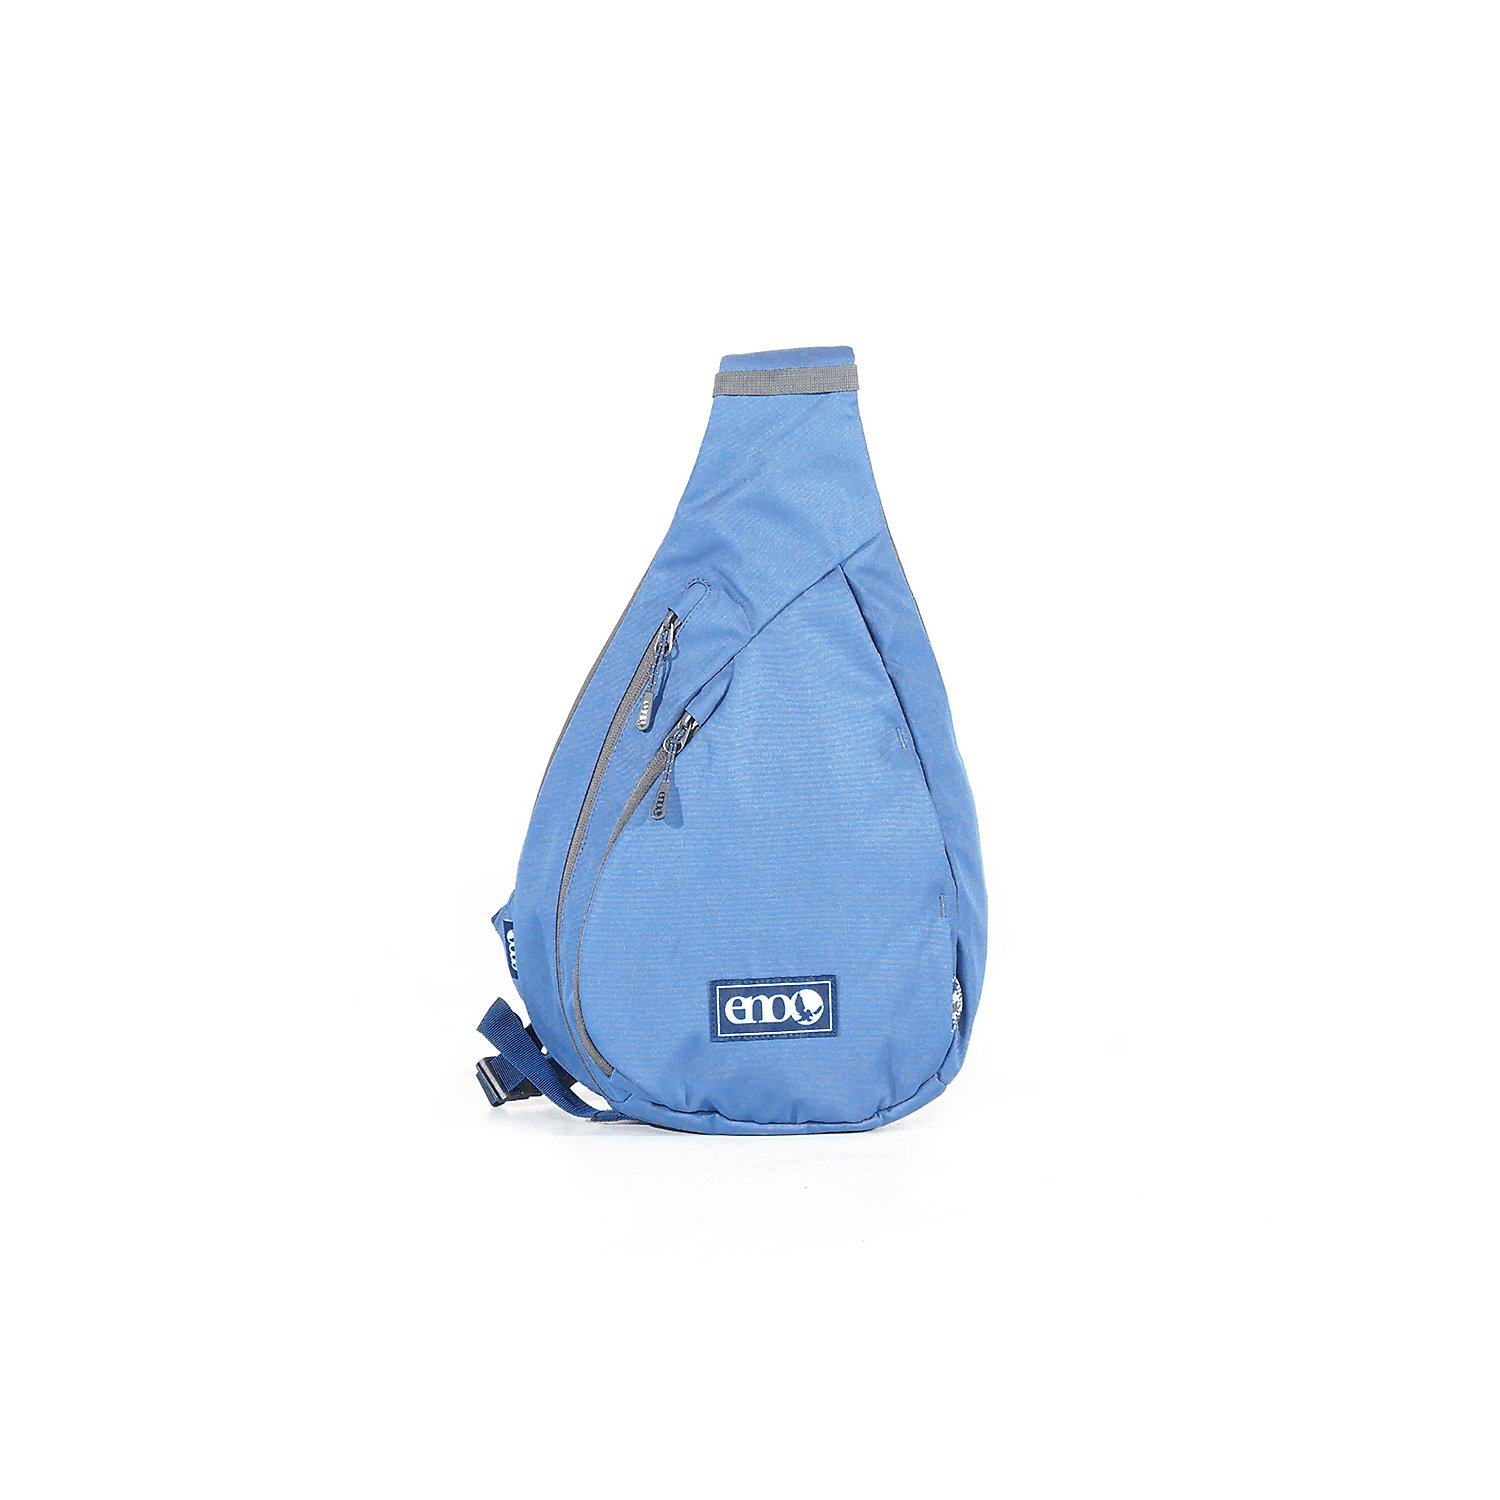 Eagles Nest Outfitters Kanga Sling Pack